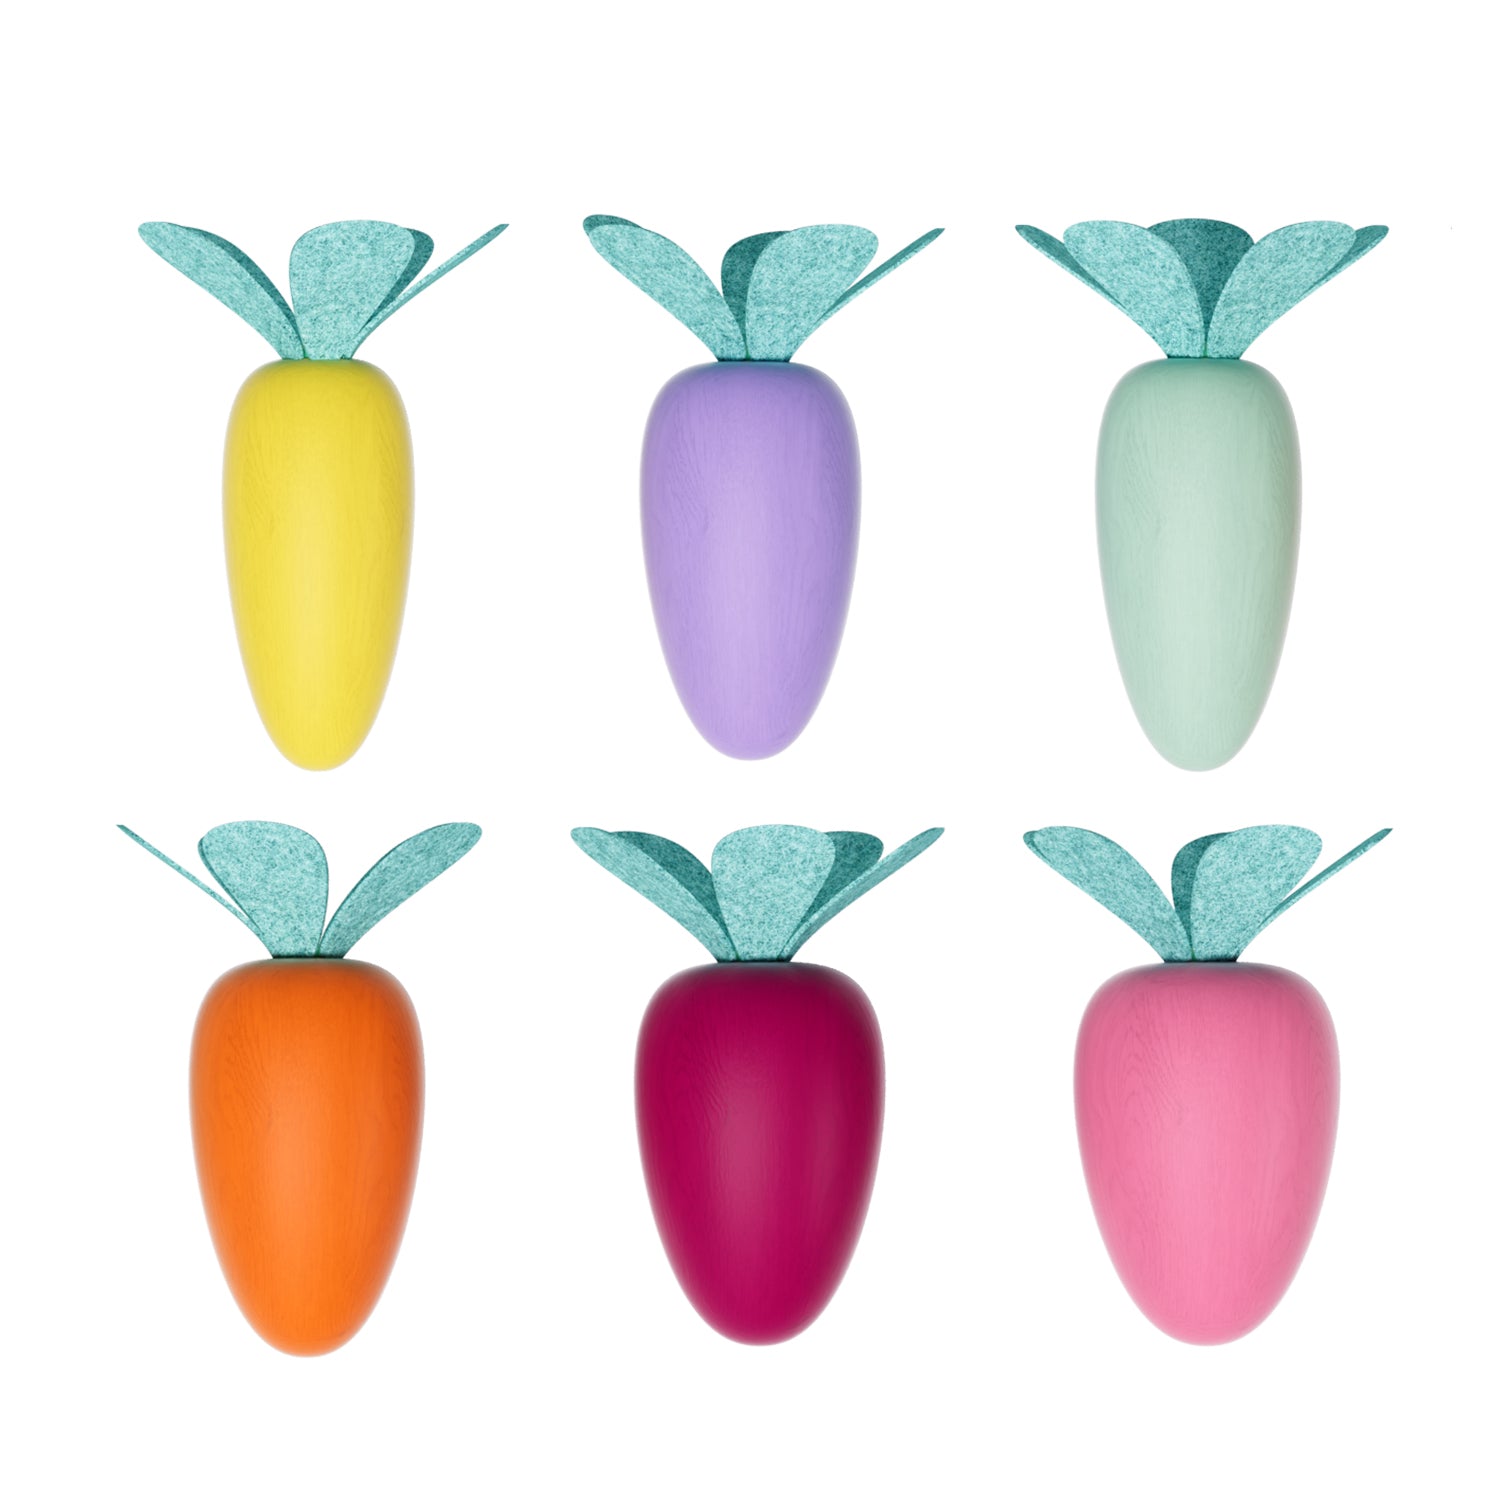 The wooden carrots are painted in trendy water-based colours, the carrot green is made of fluffy felt.